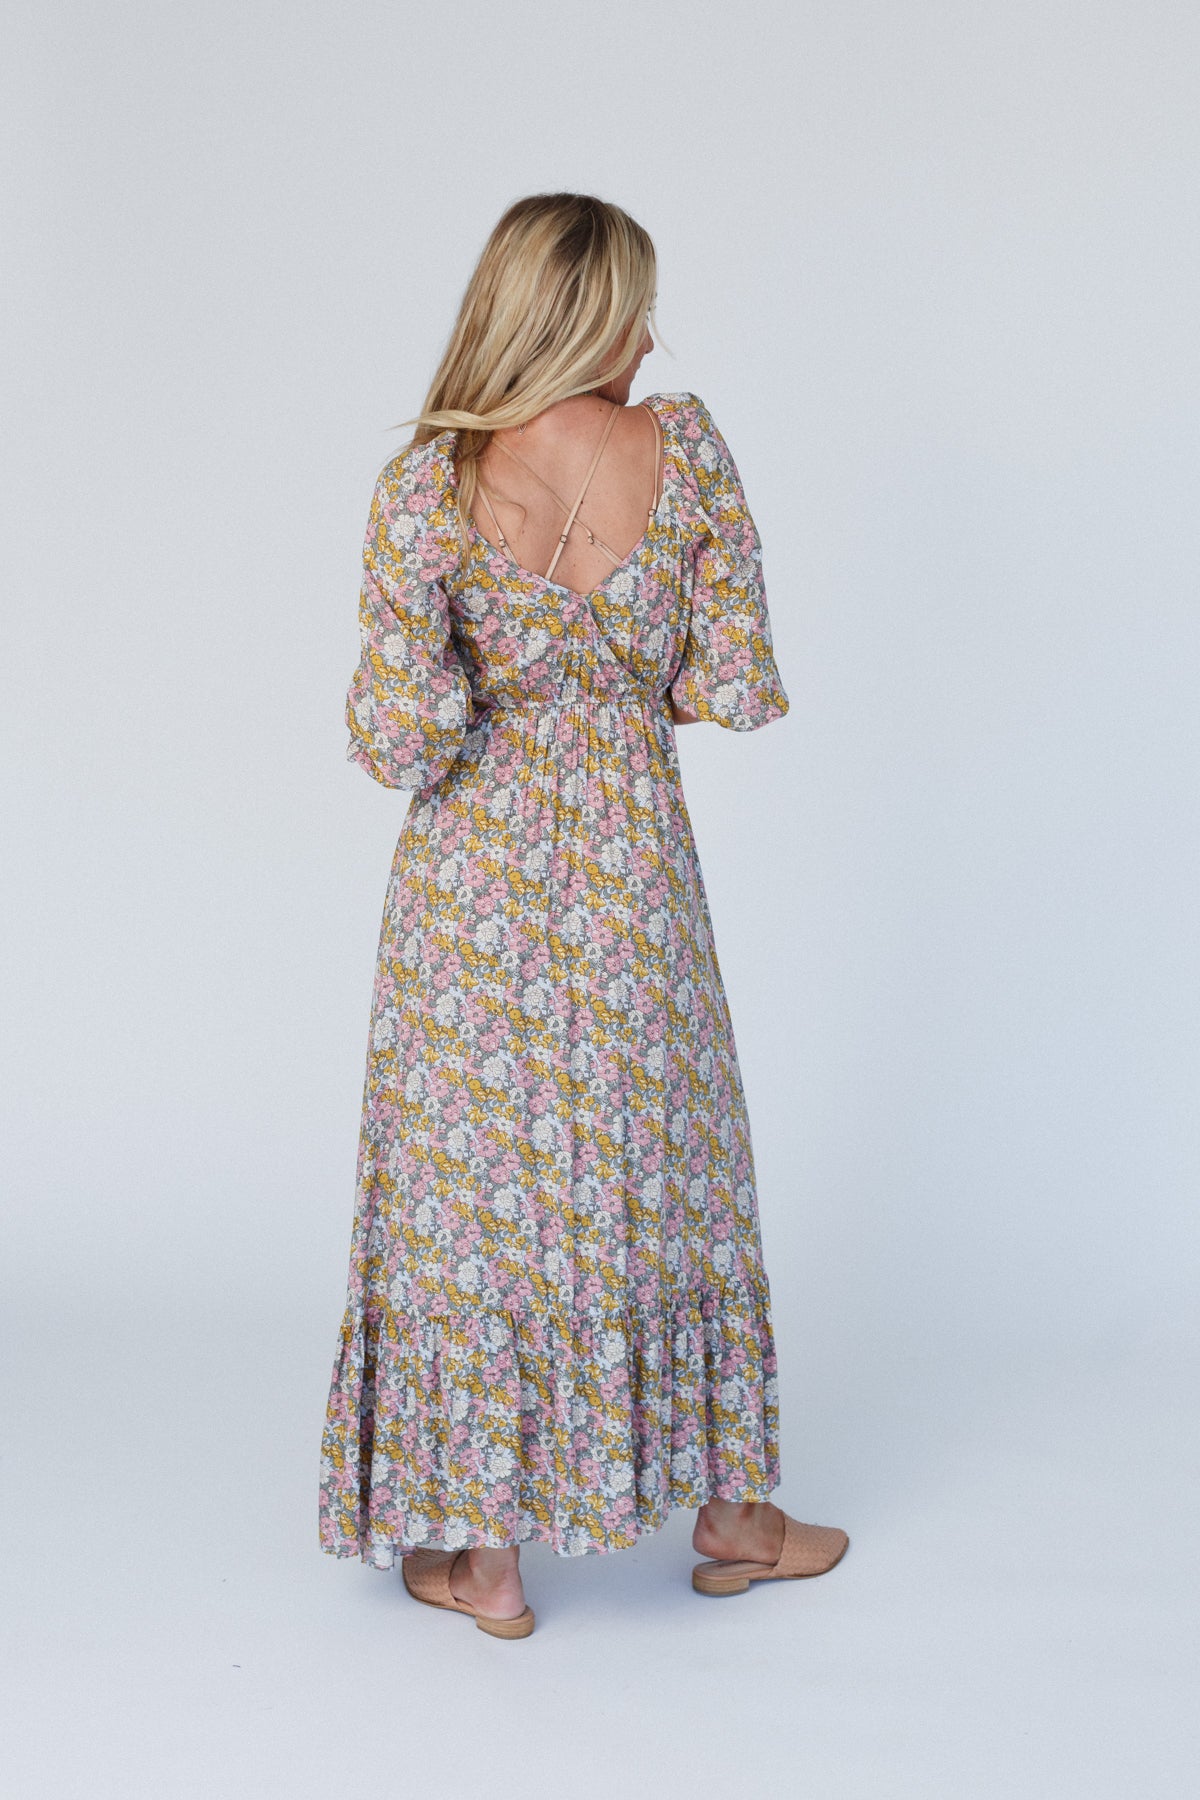 Reflections Floral Maxi Dress - Multi